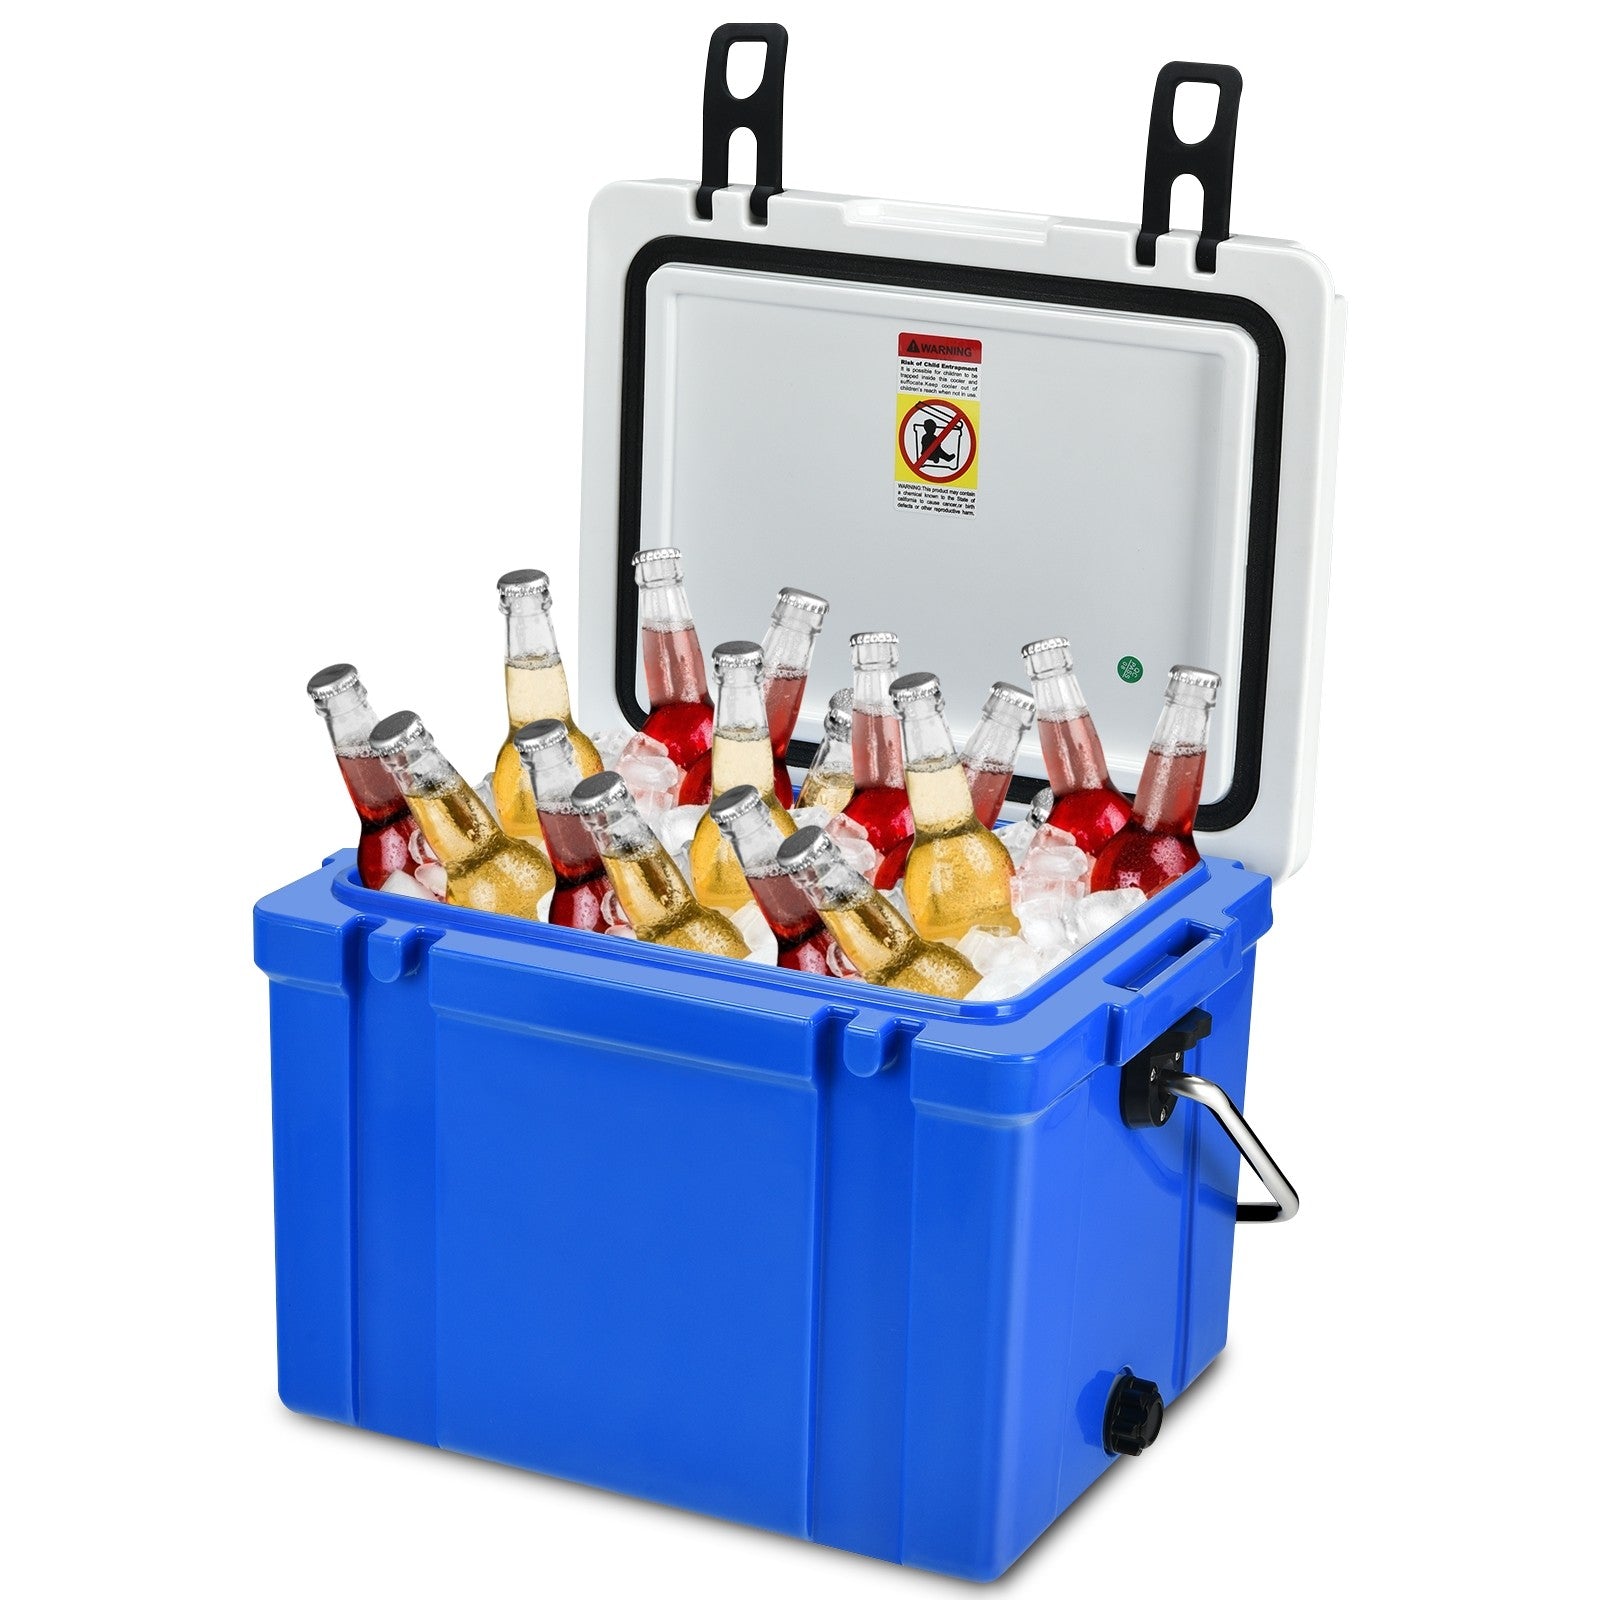 Portable Cooler, 26 Quart 3-4 Days Camping Ice Chest with Stainless Handles / Nylon Rope Handle